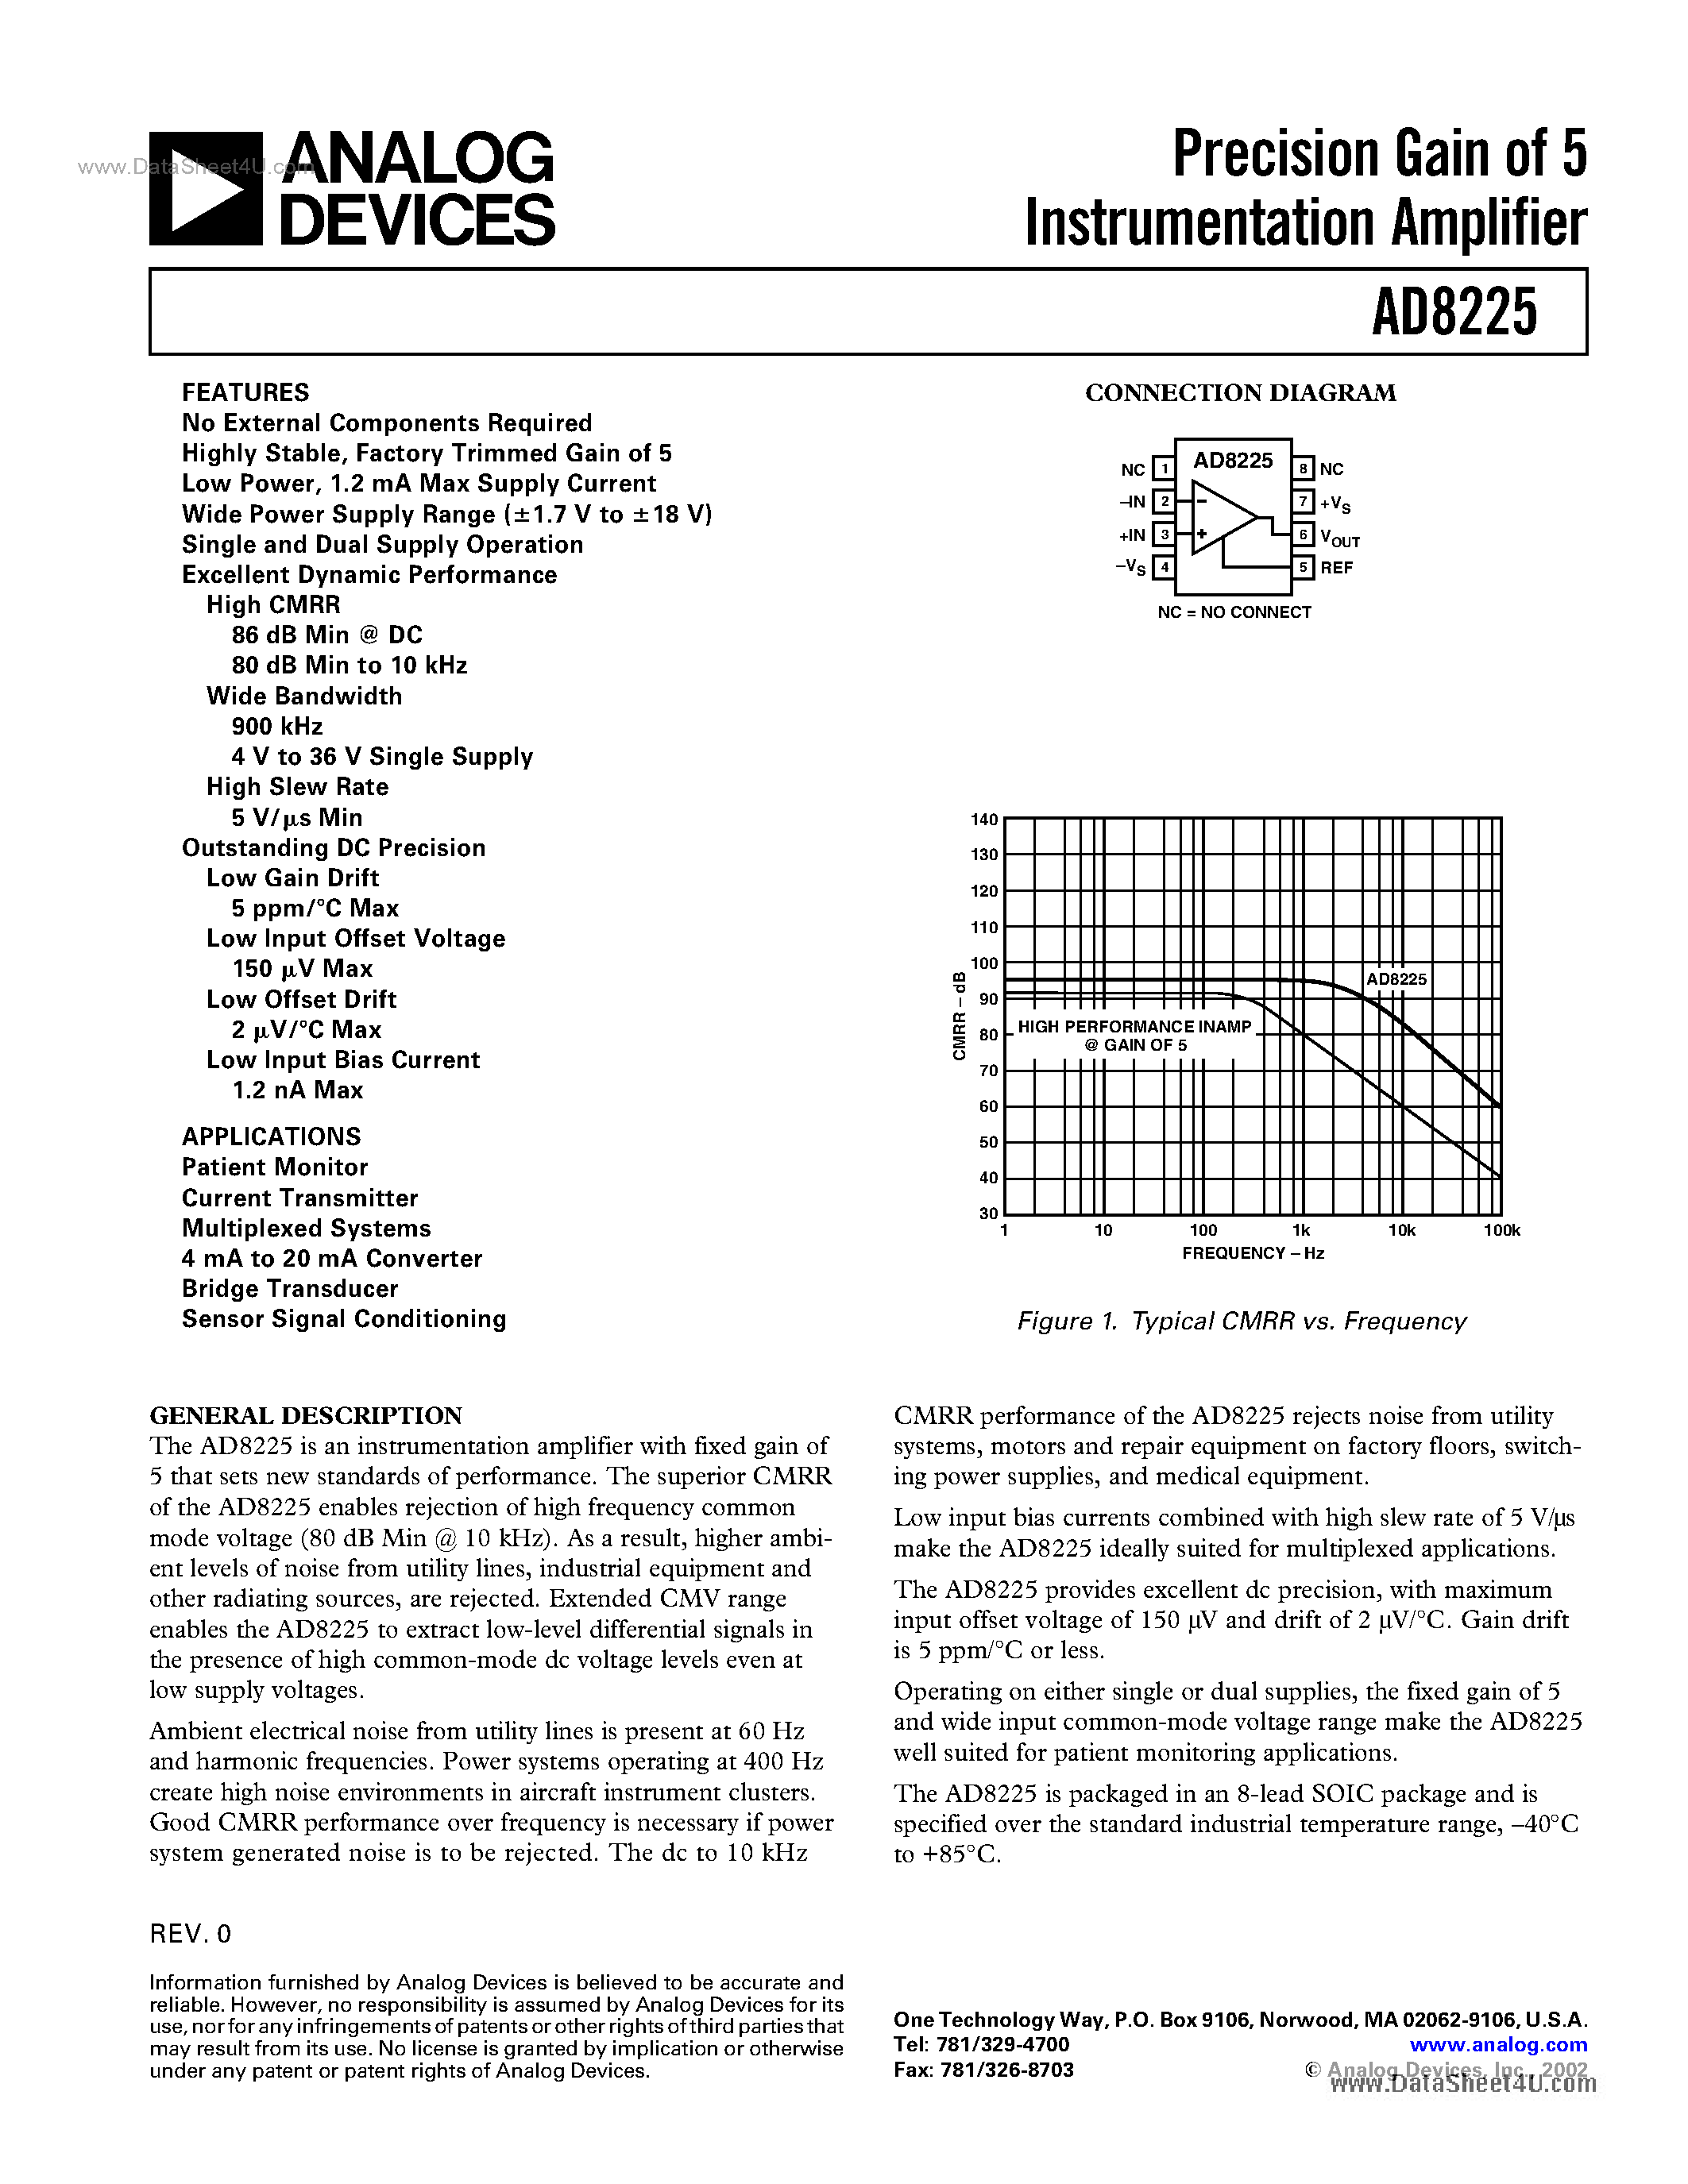 Datasheet AD8225 - Precision Gain of 5 Instrumentation Amplifier page 1